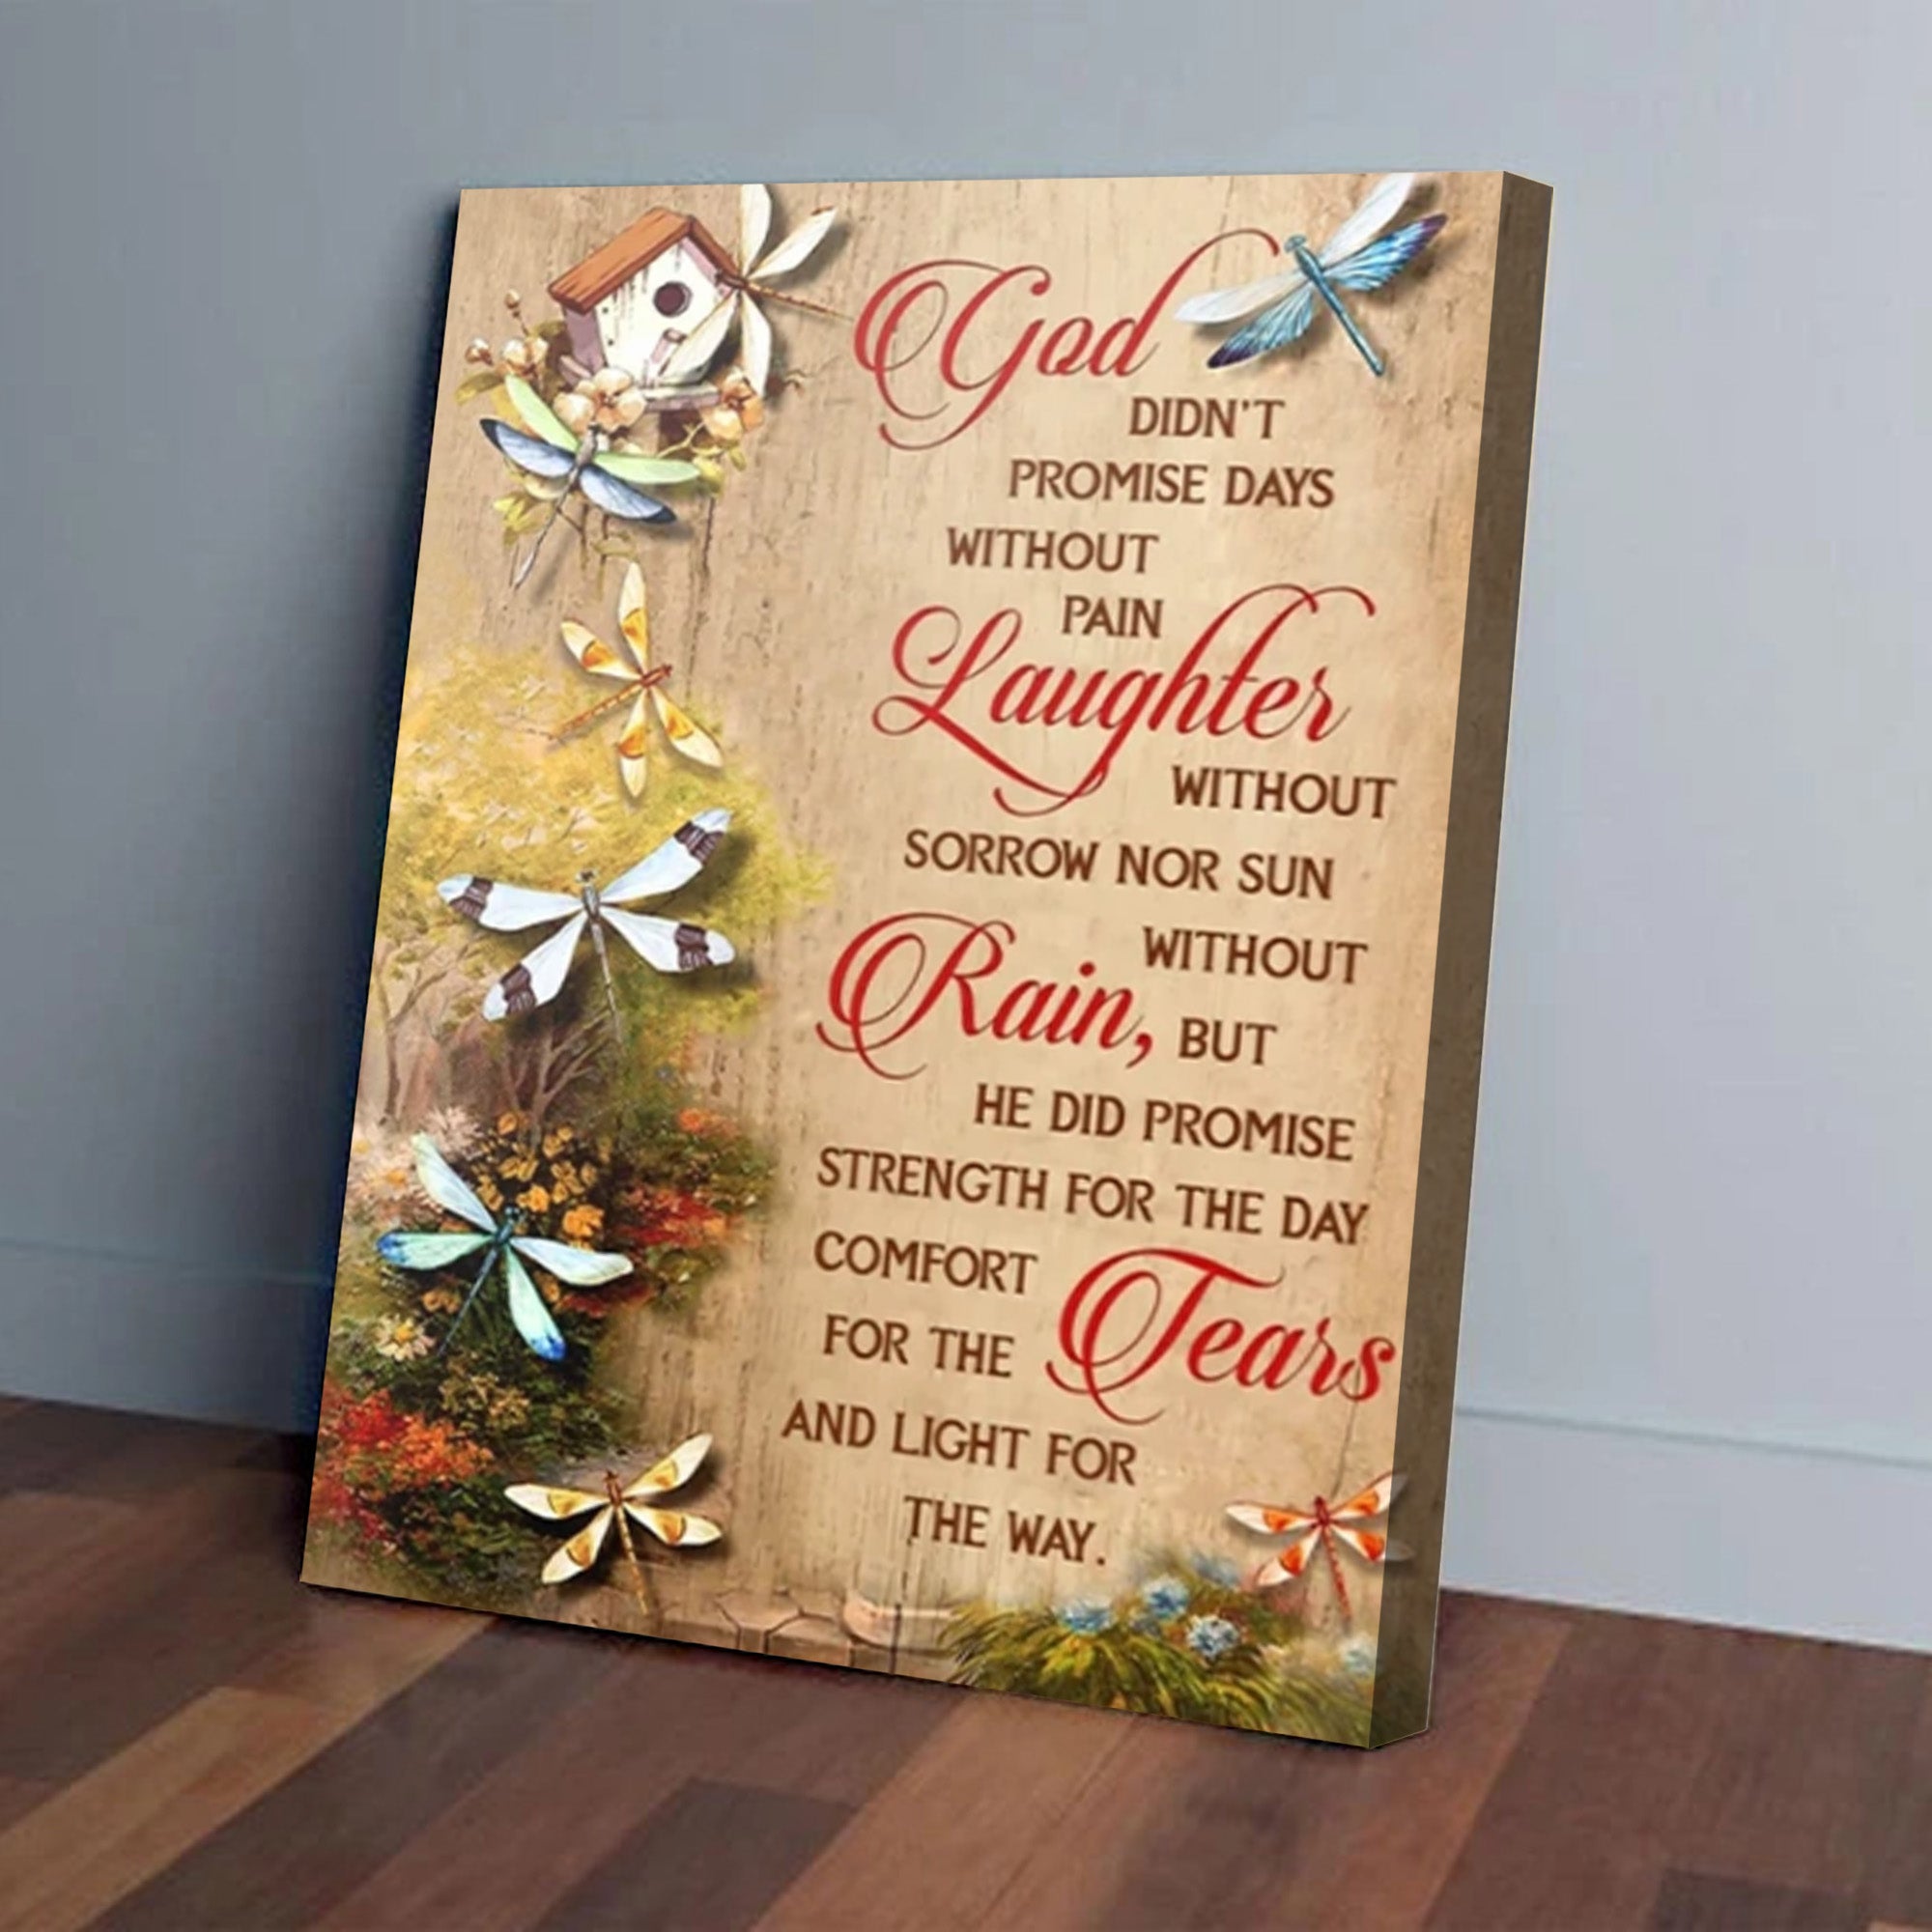 Dragonfly Canvas – God Didn’t Promise Days Without Pain